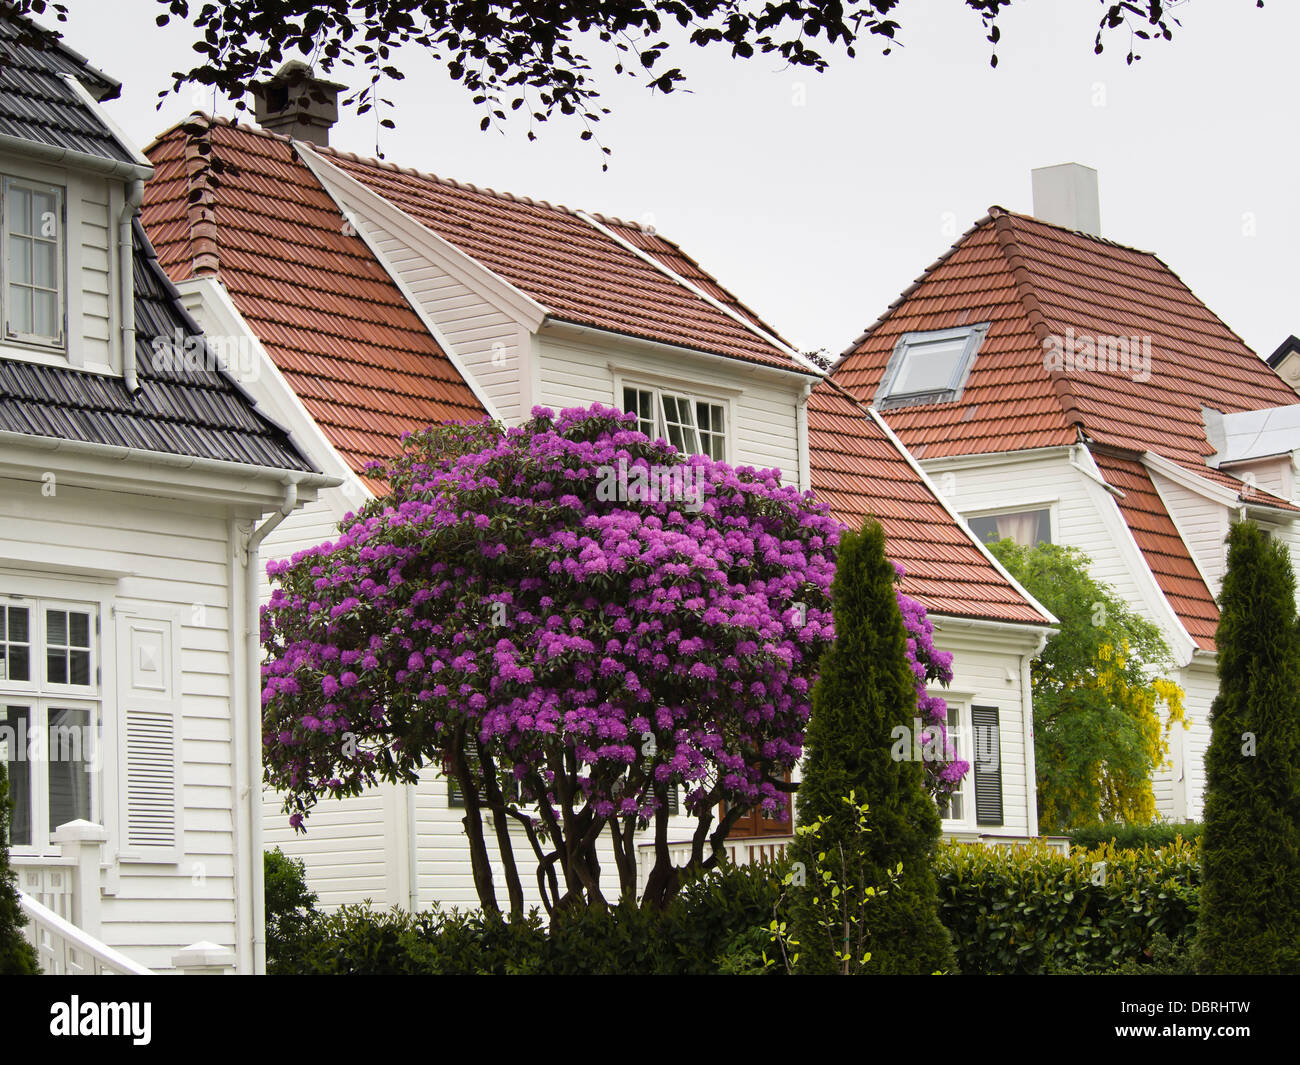 Residential area in Stavanger Norway, white wood paneled houses with gardens, large purple Rhododendron colouring the scene Stock Photo